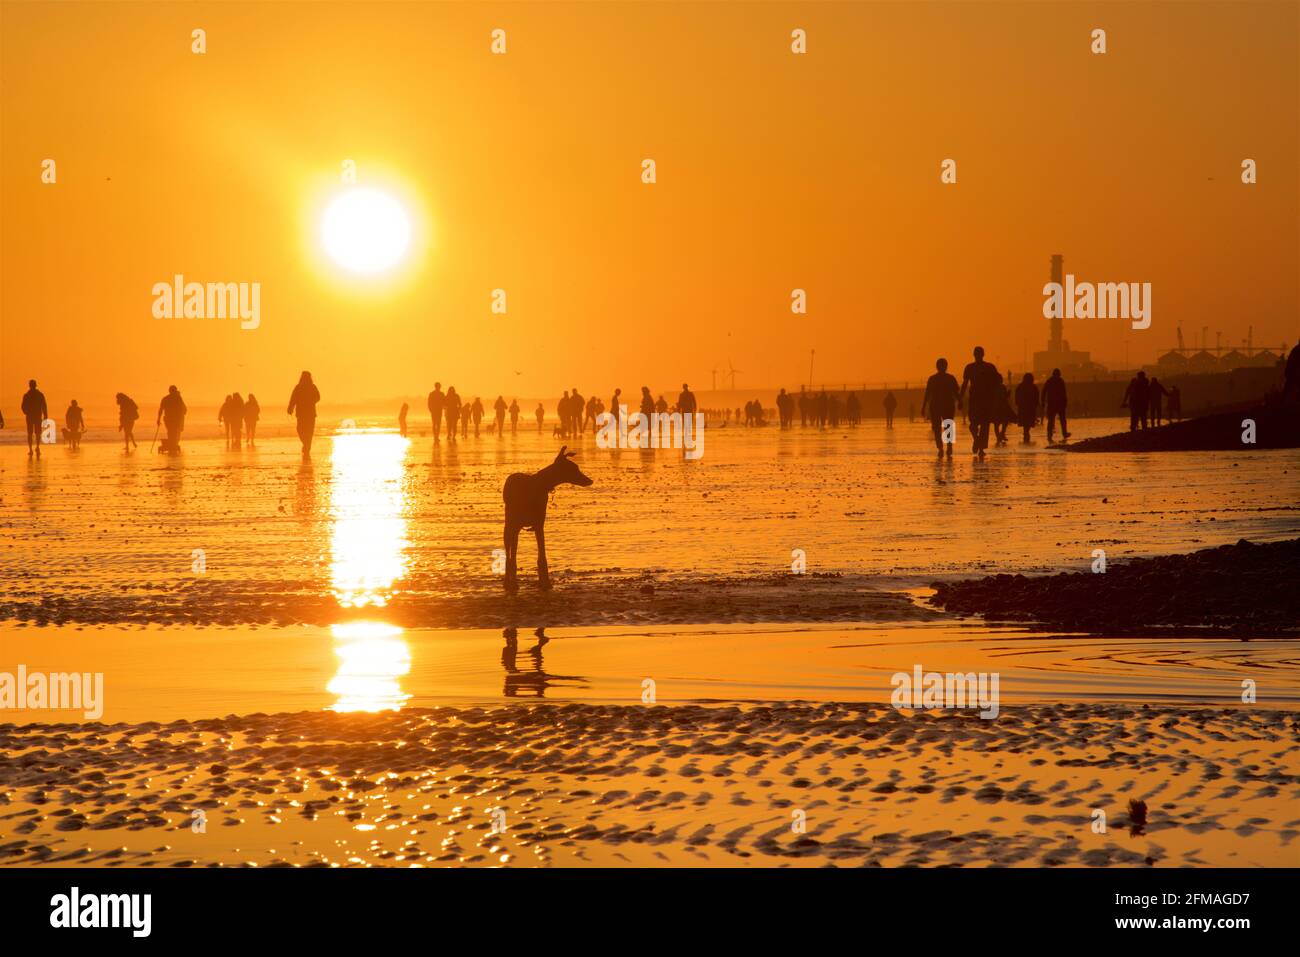 Brighton and Hove beach at low tide looking west. Silhouettes of people walking along the sandy shore at sunset. East Sussex, England. Dog by a pool of water. Stock Photo